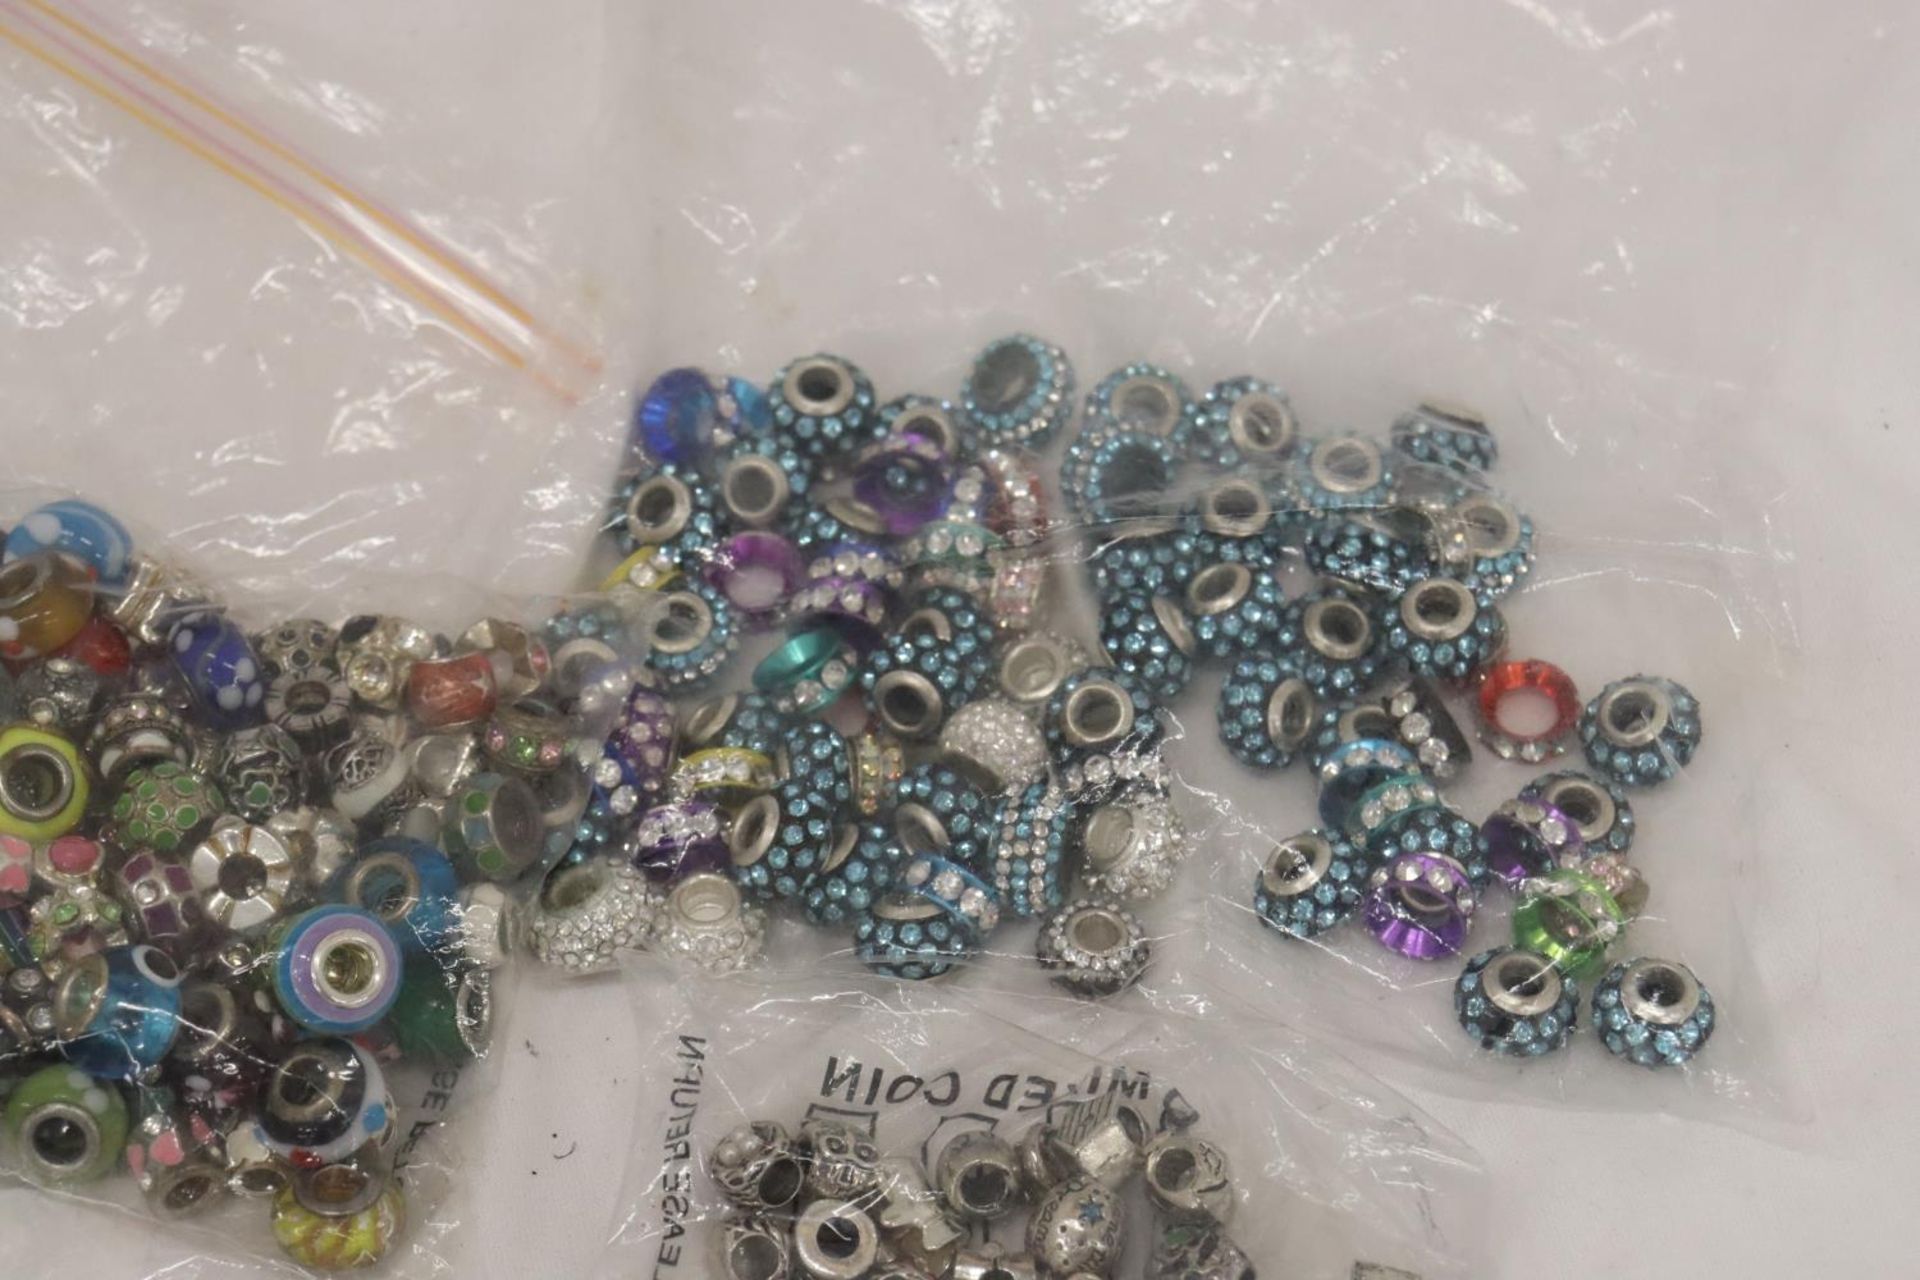 A LARGE QUANTITY OF PANDORA STYLE BEADS, SOME MARKED 925 - Image 4 of 8